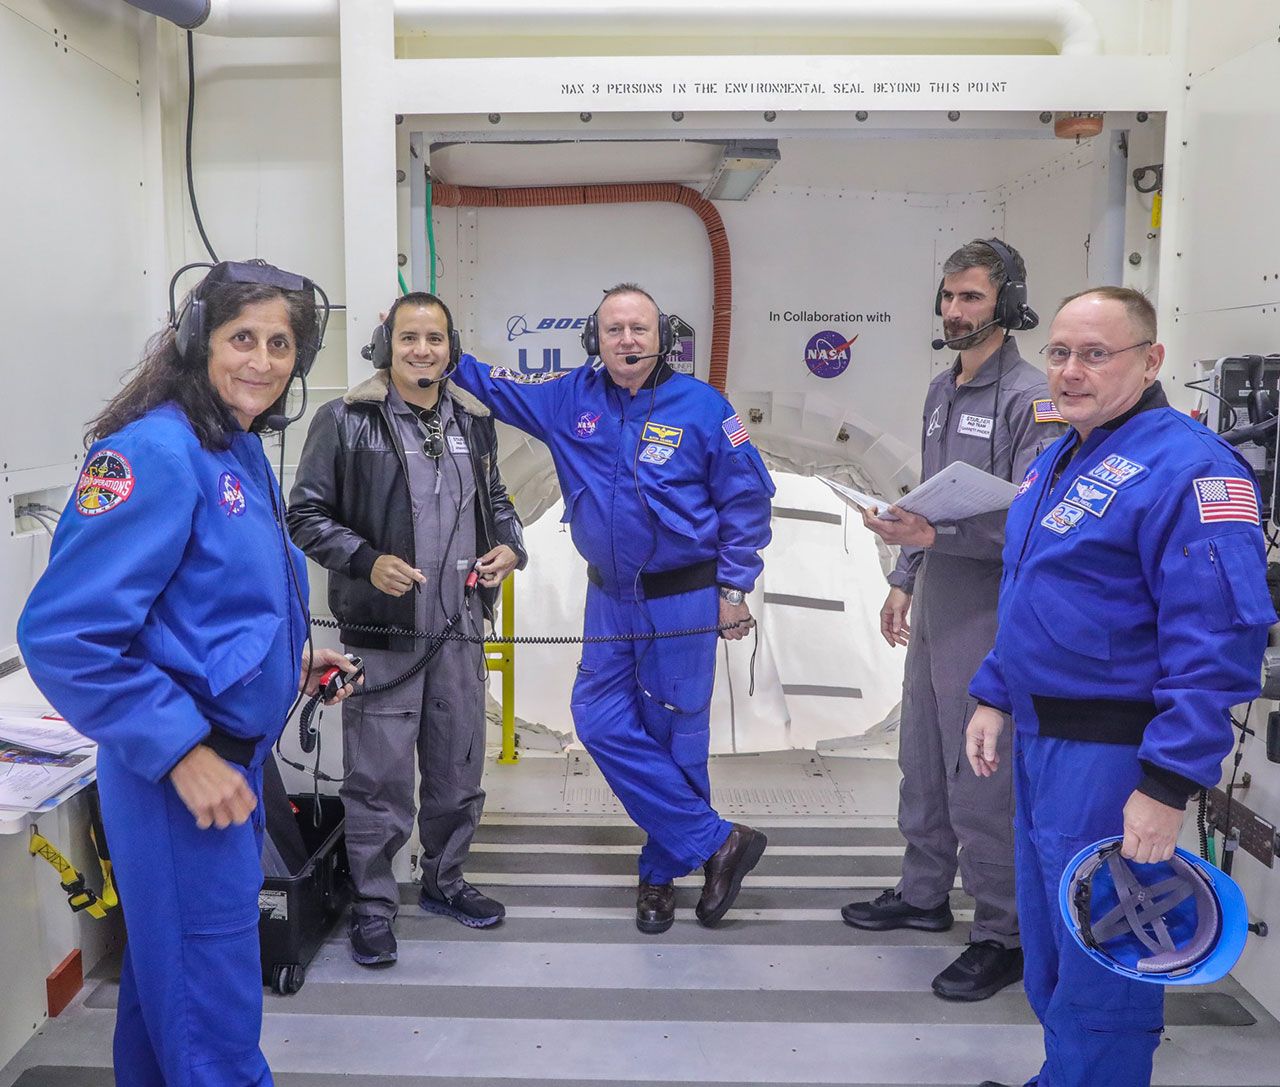 NASA astronauts Suni Williams and Butch Wilmore with team members